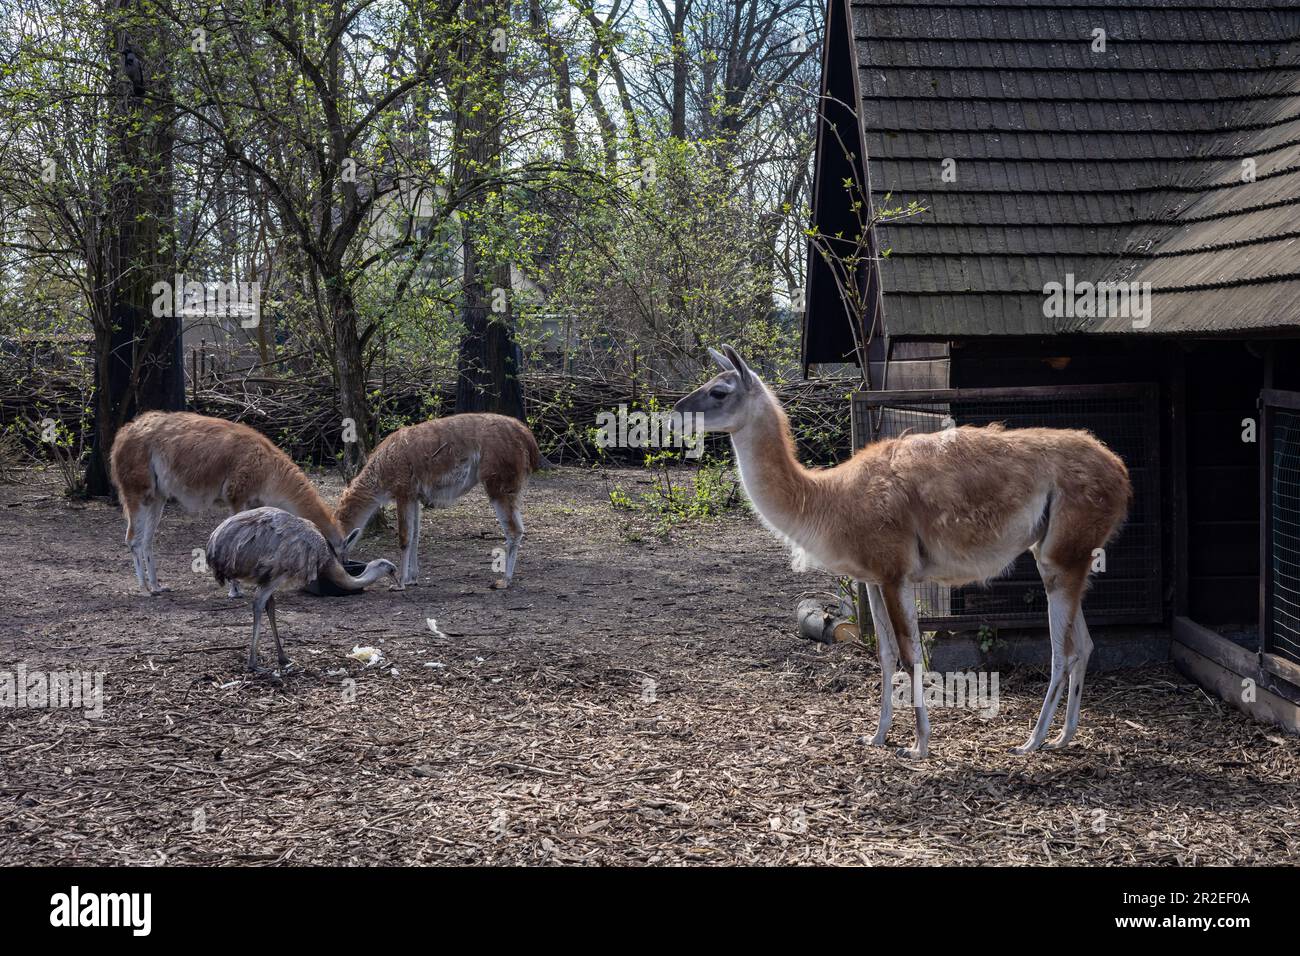 Three guanacos and grey nandu bird in front of a wooden stable. Stock Photo